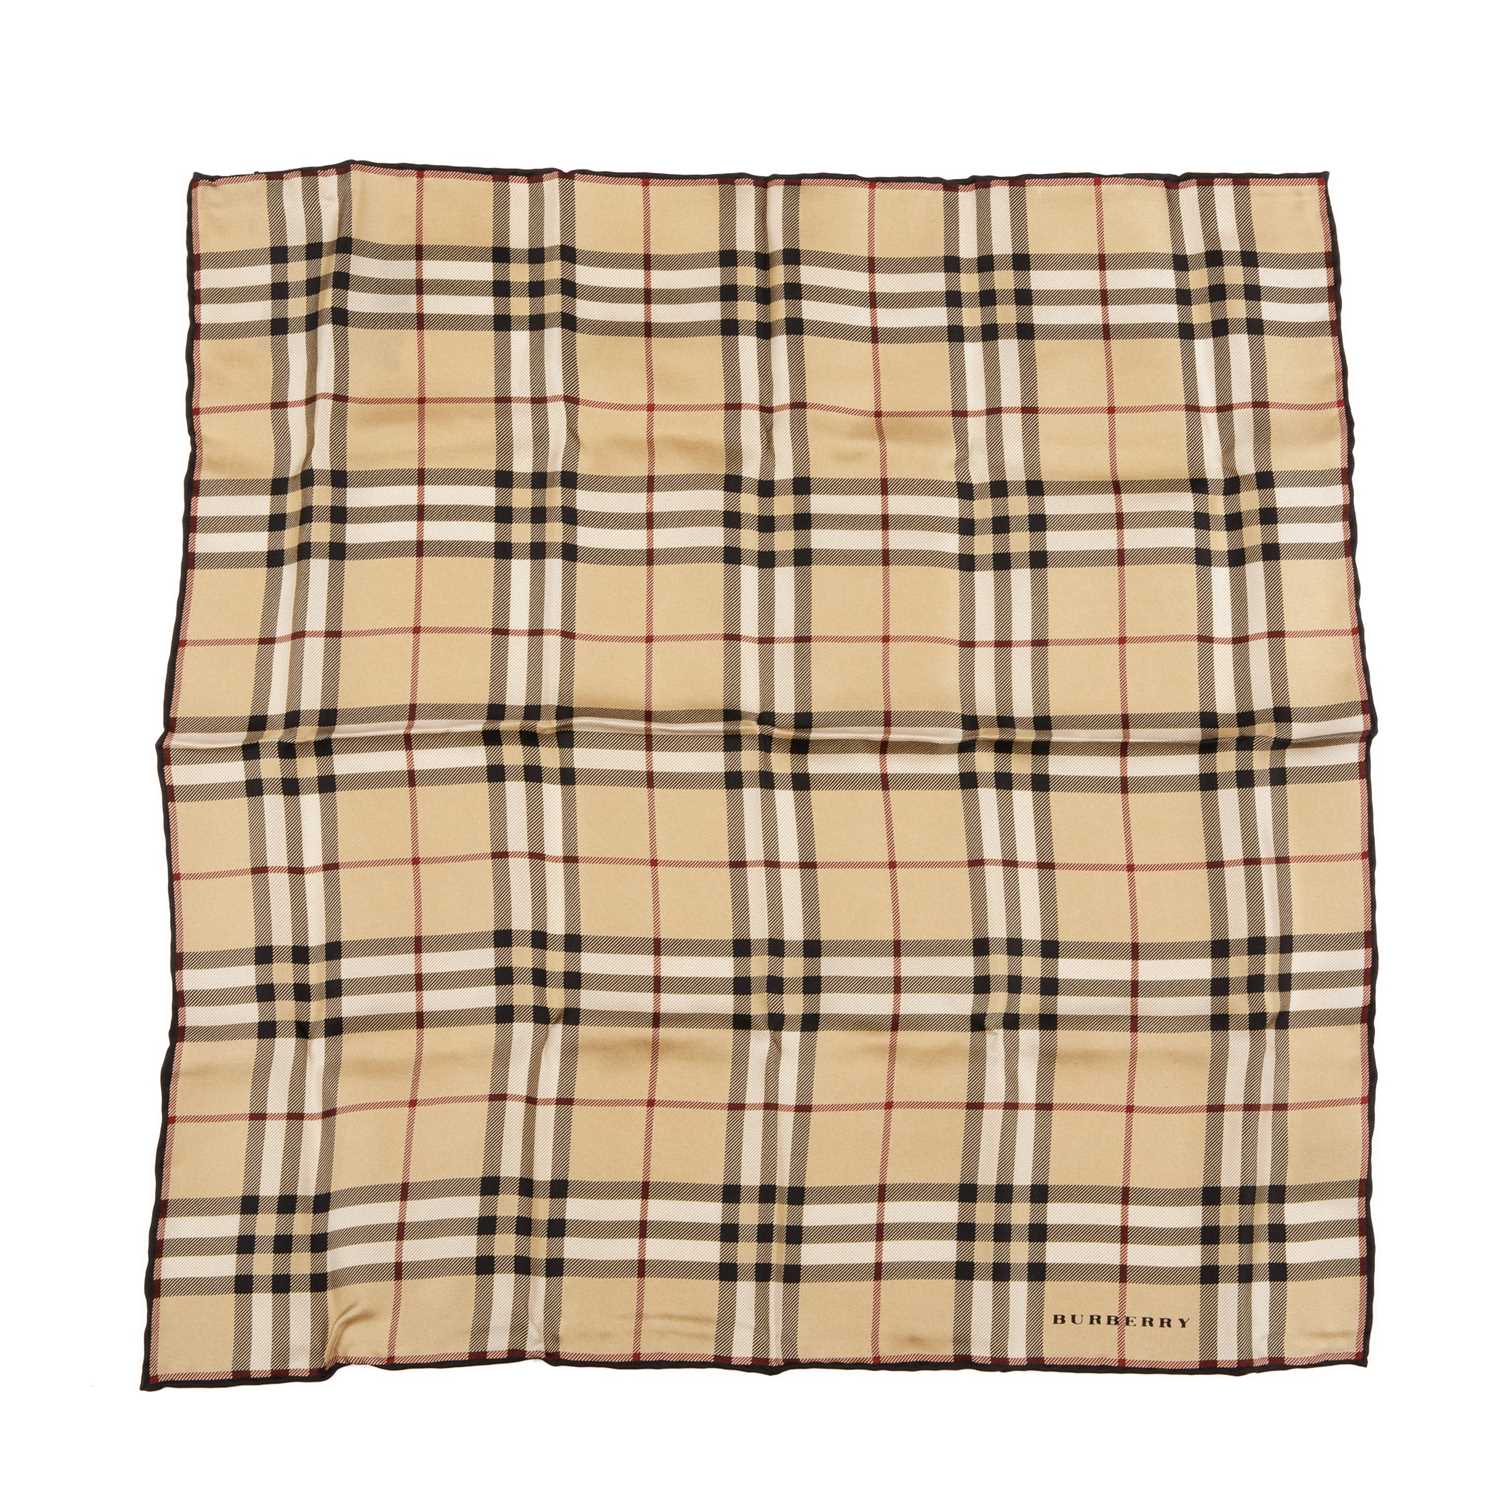 Burberry, two Nova Check silk handkerchiefs, with hand-rolled edges, measuring 47 by 47cm, with - Image 4 of 6